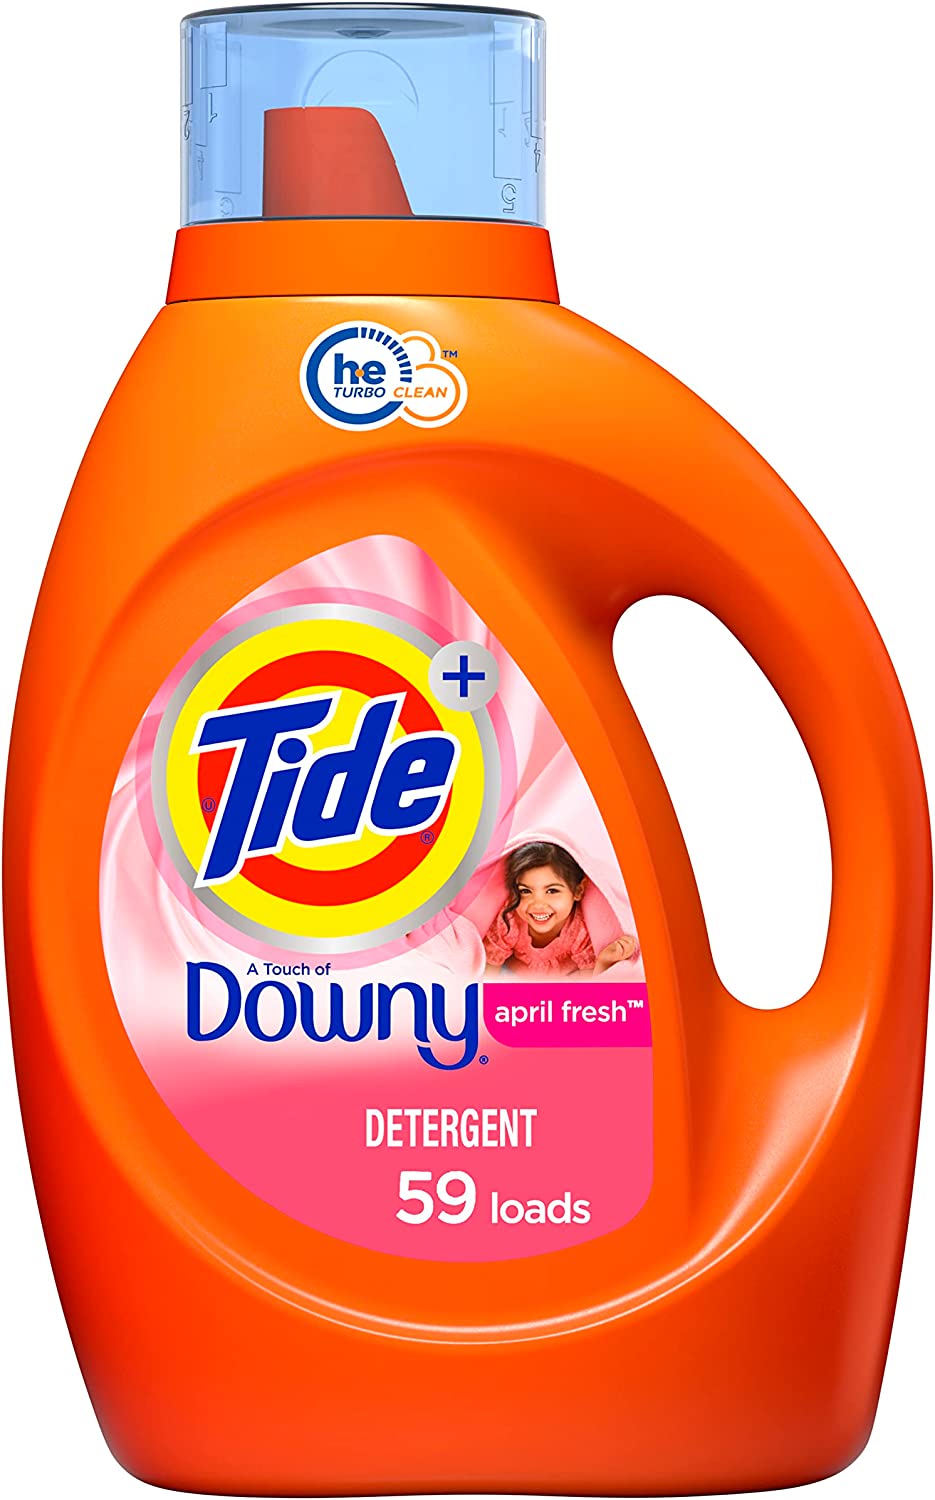 Tide Liquid Laundry Detergent Buy 3 Get $10 Off: 92-Oz Tide w/ Downy (April Fresh) 3 for $26.95 & More w/ S&S + Free Shipping w/ Prime or on $25+